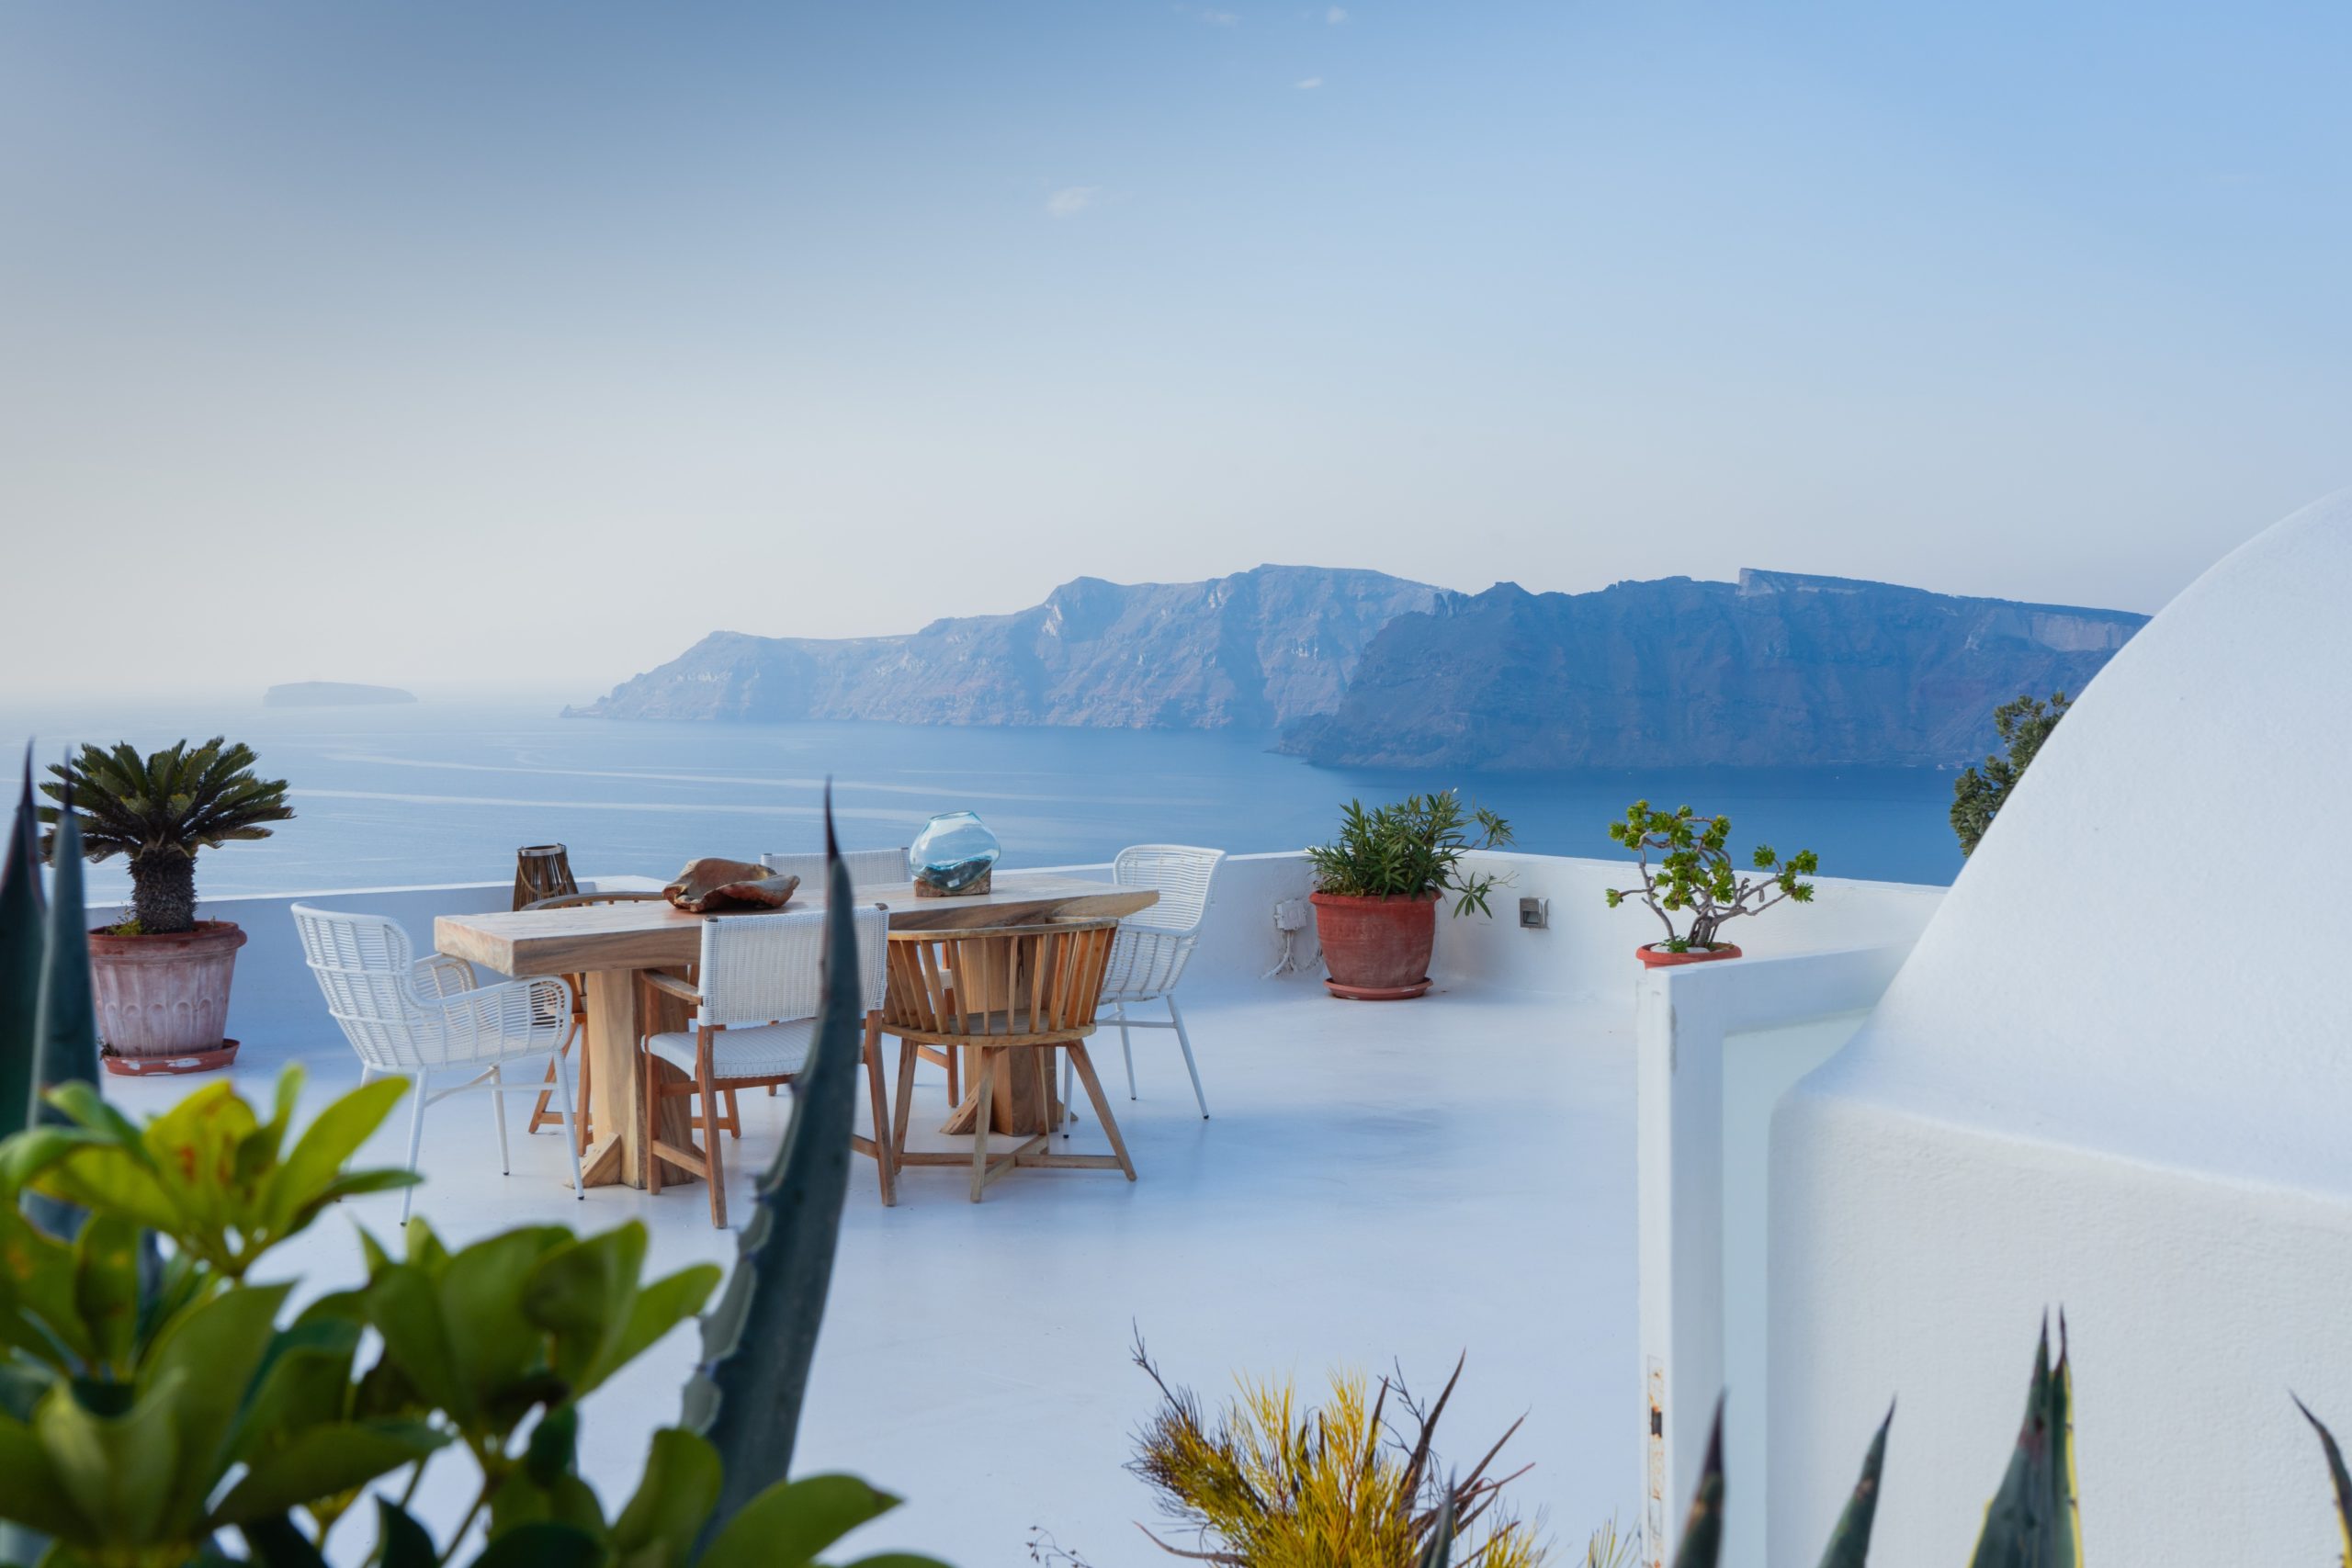 Imagine sitting here on this modern white rooftop deck in Santorini on your wedding night looking over the Aegean Sea.